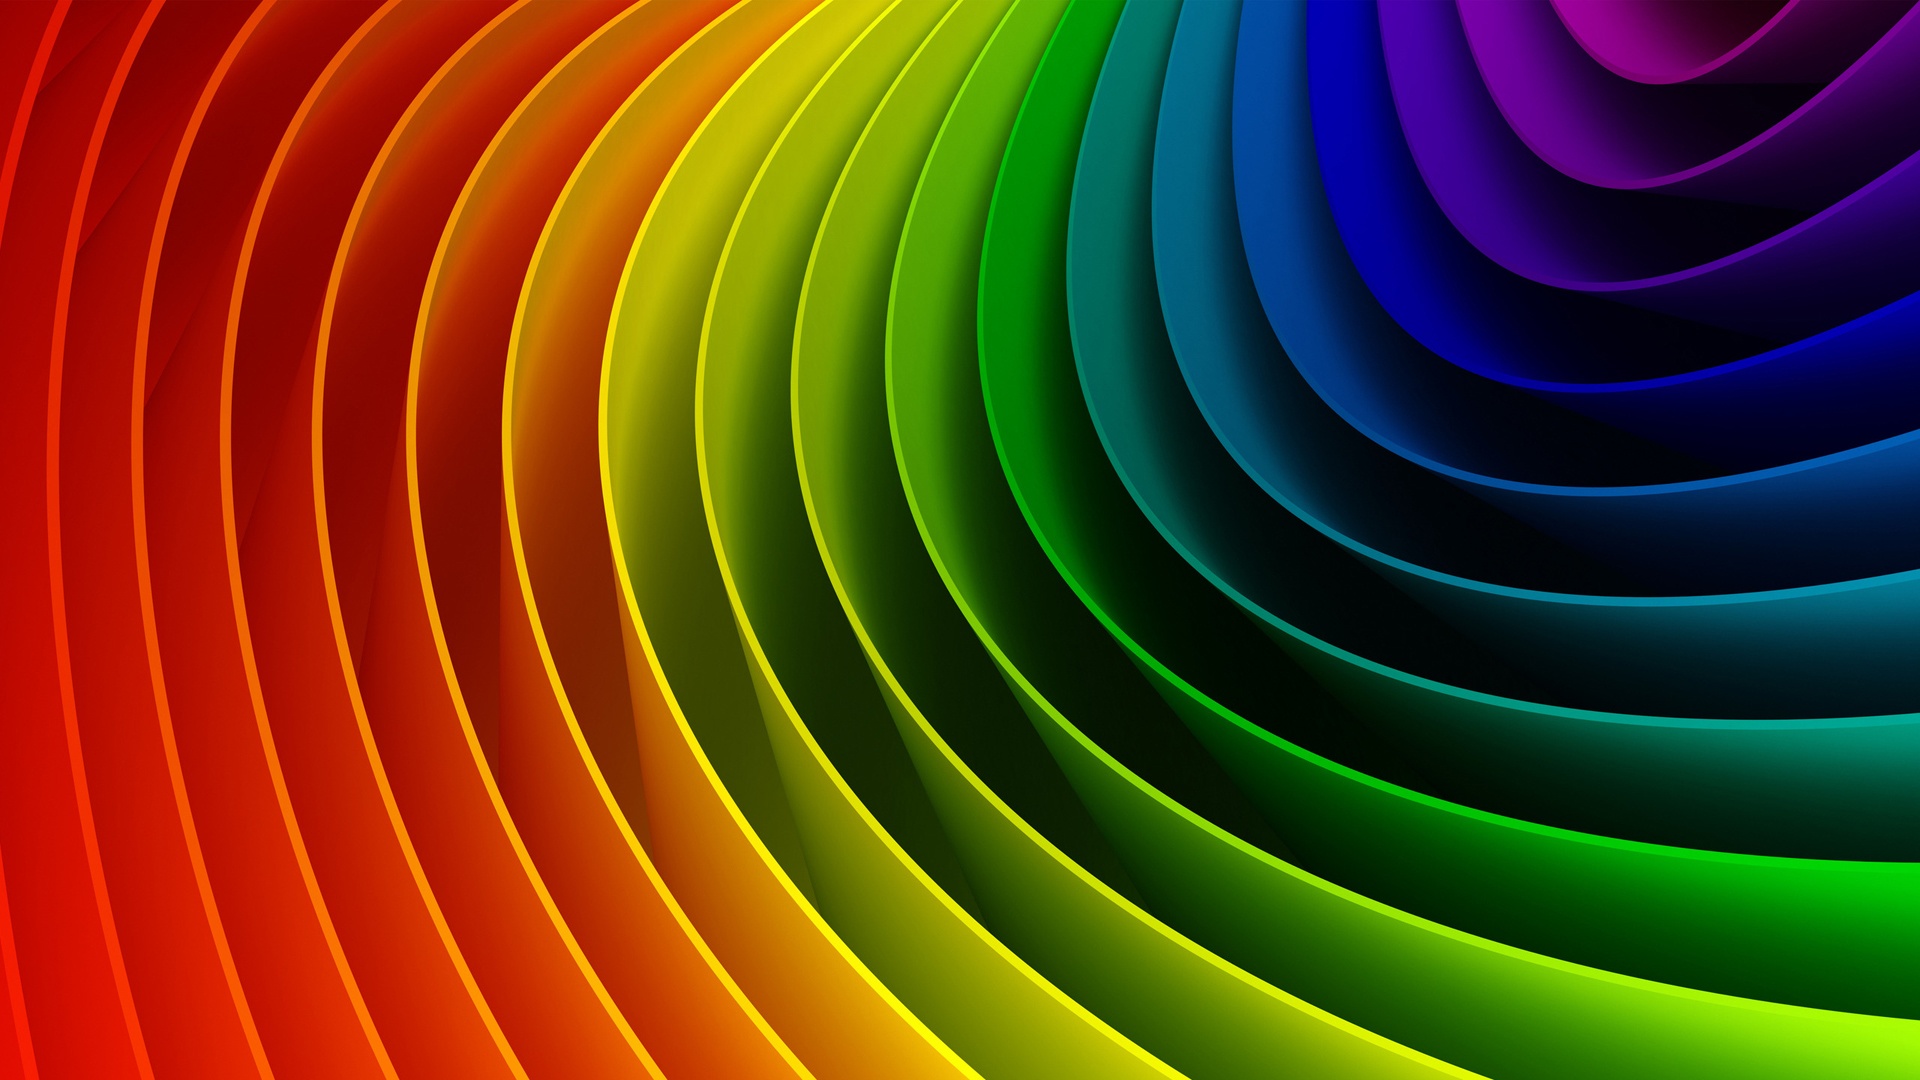 Free Colorful Wallpaper Desktop | Wallpapers, Backgrounds, Images ...